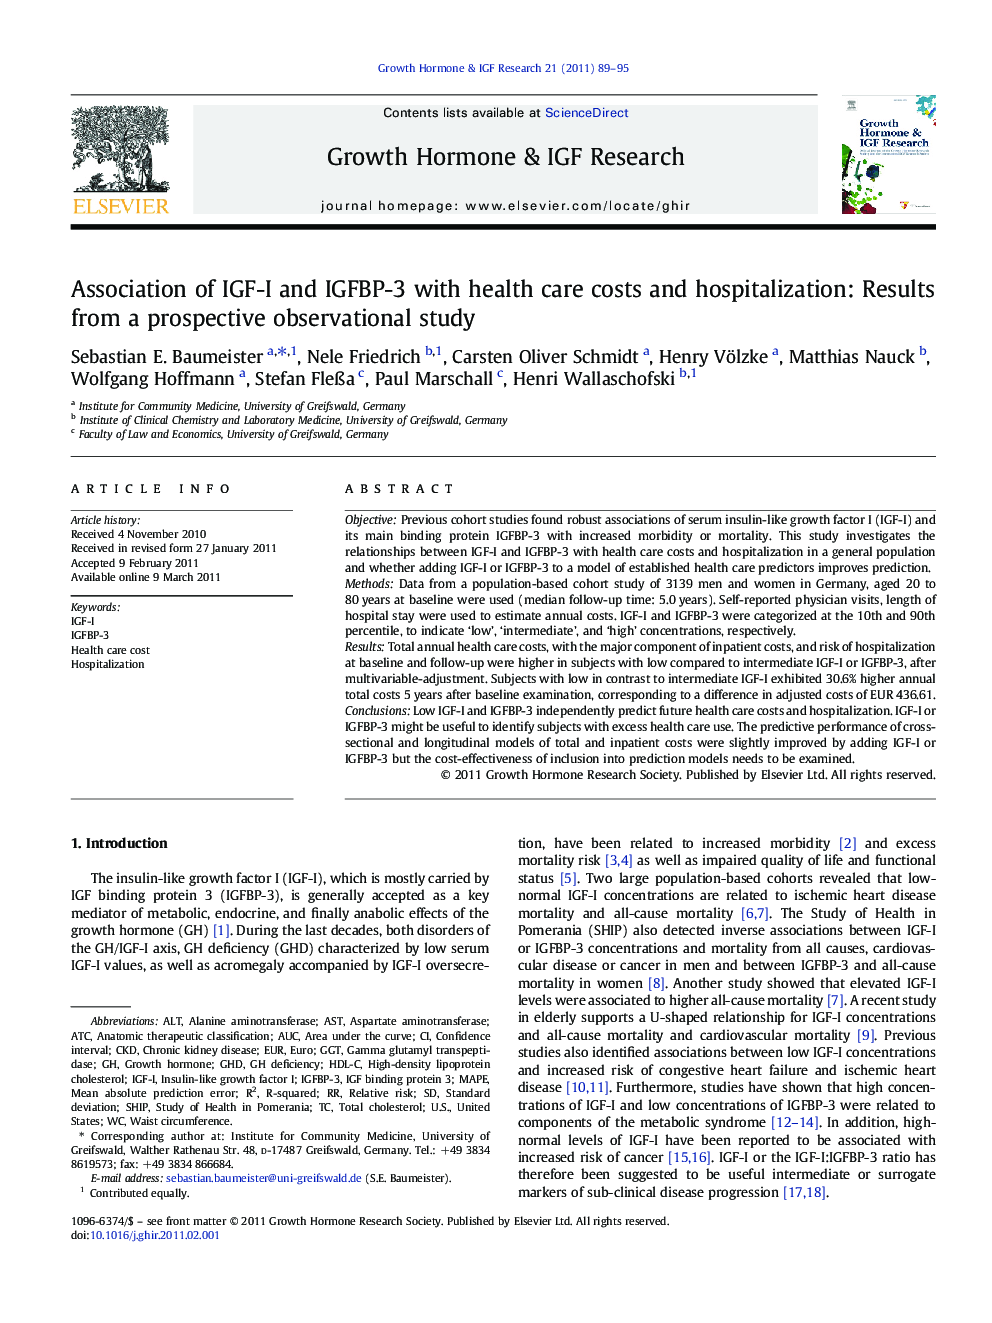 Association of IGF-I and IGFBP-3 with health care costs and hospitalization: Results from a prospective observational study